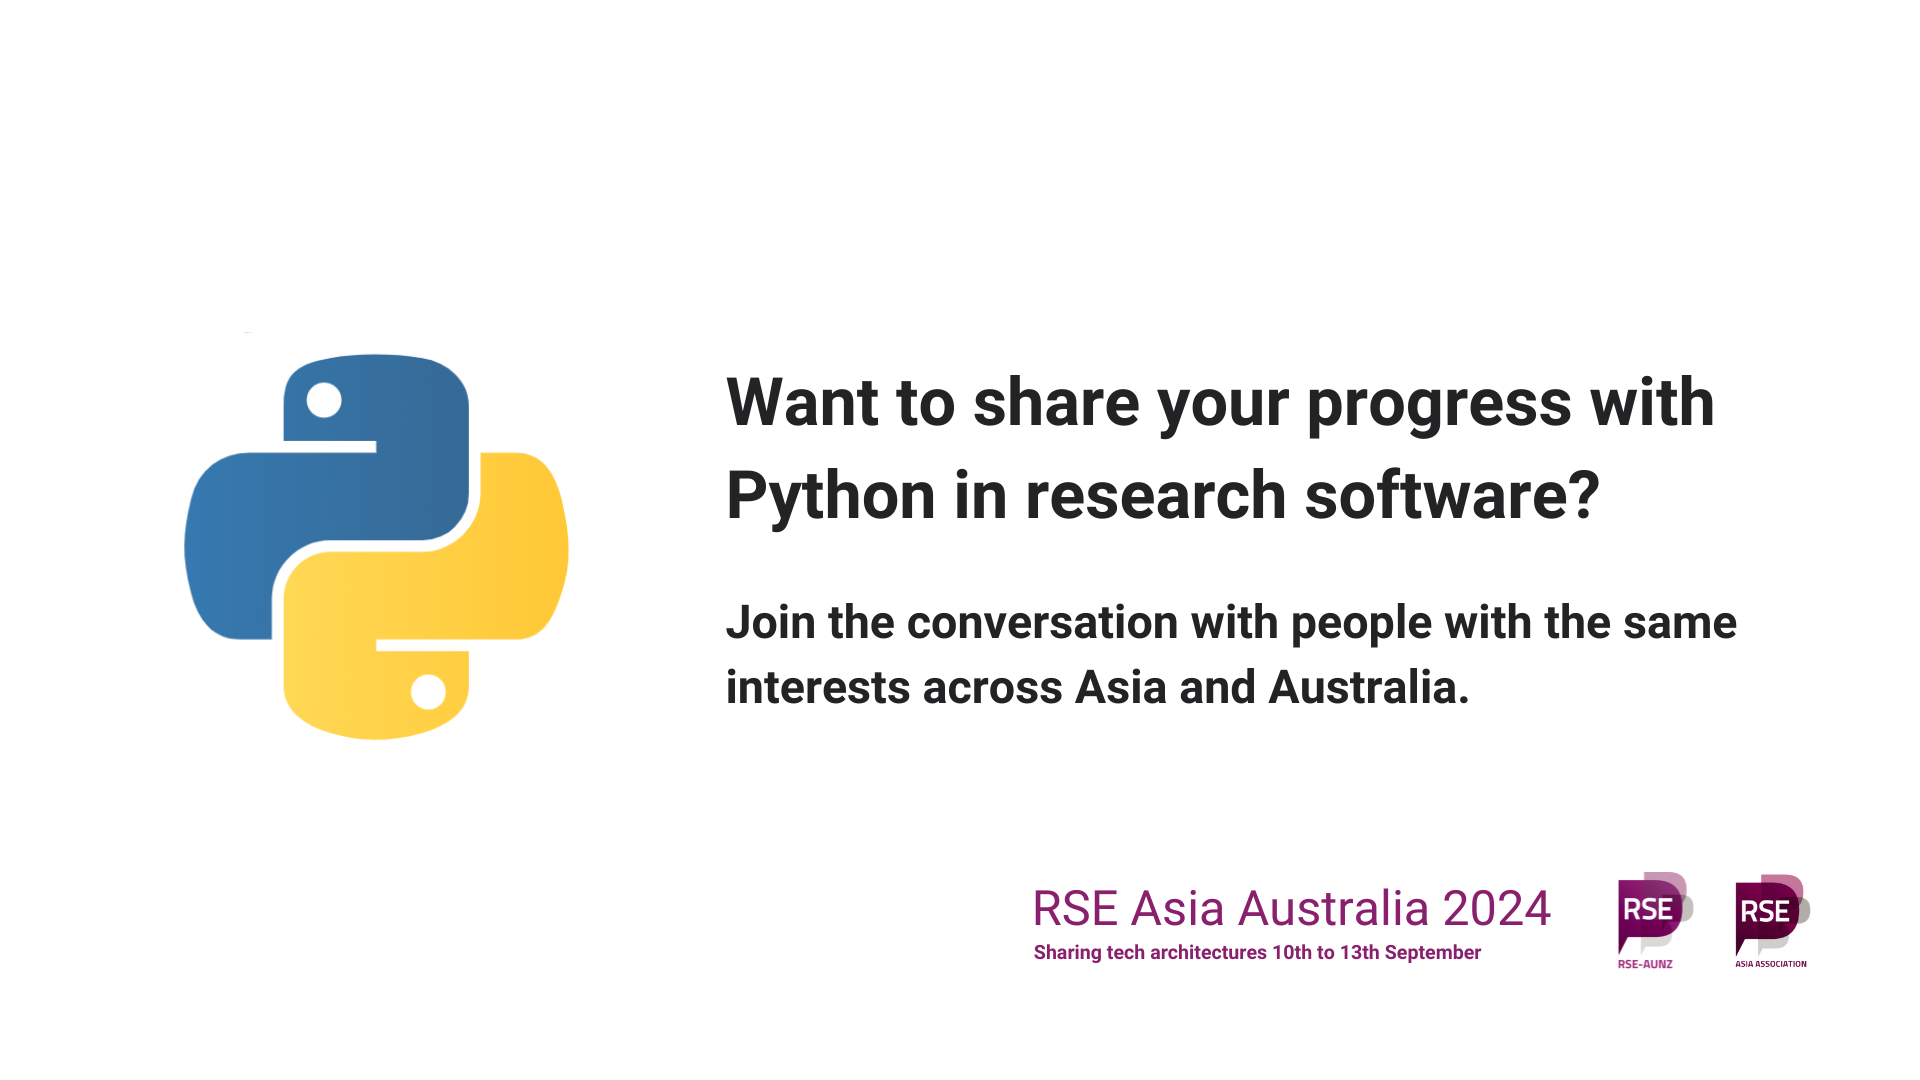 Python Logo. Want to share your progress with Python in research software? Join the conversation with people with the same interests across Asia and Australia. RSE Asia Australia 2024. Sharing tech architectures. 10th to 13th September. Logos of RSE AUNZ and RSE Asia.